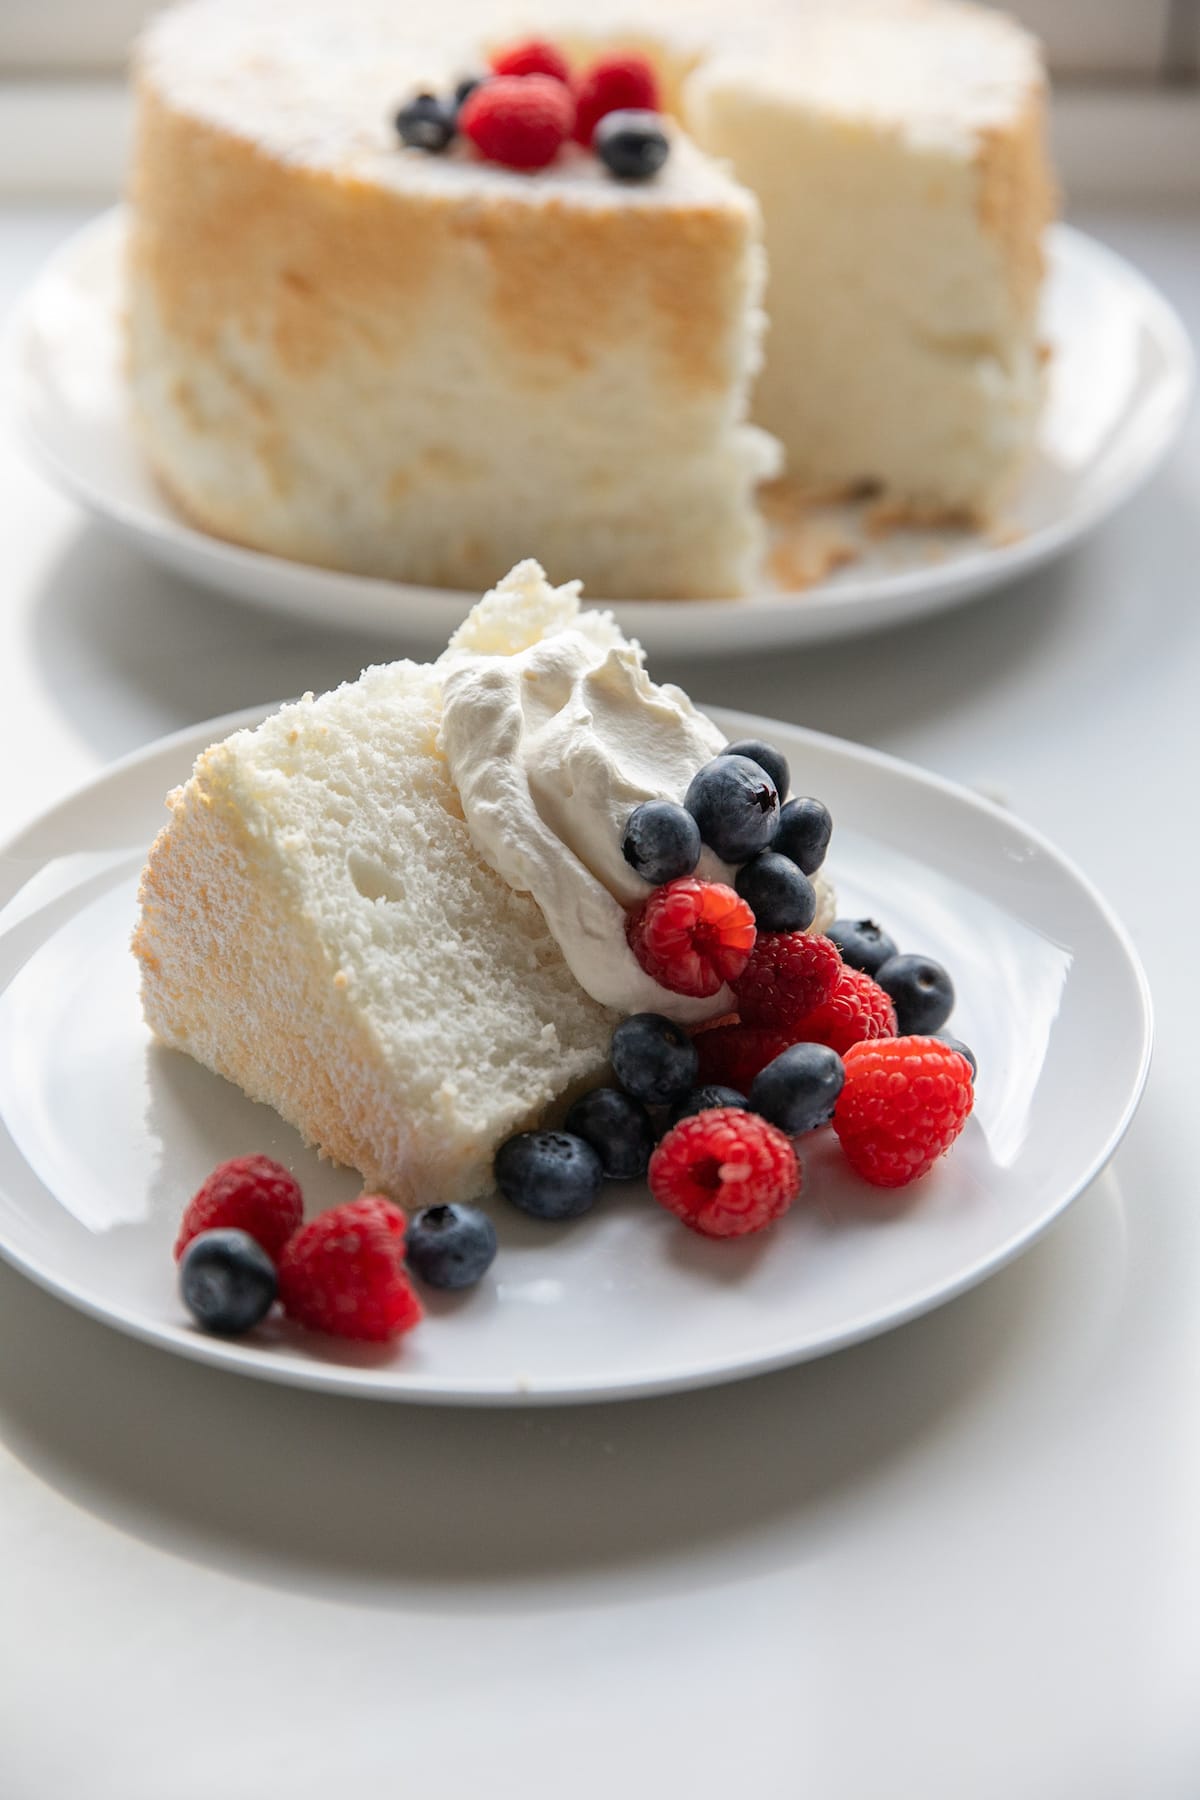 slice of angel food cake with whipped cream and berries